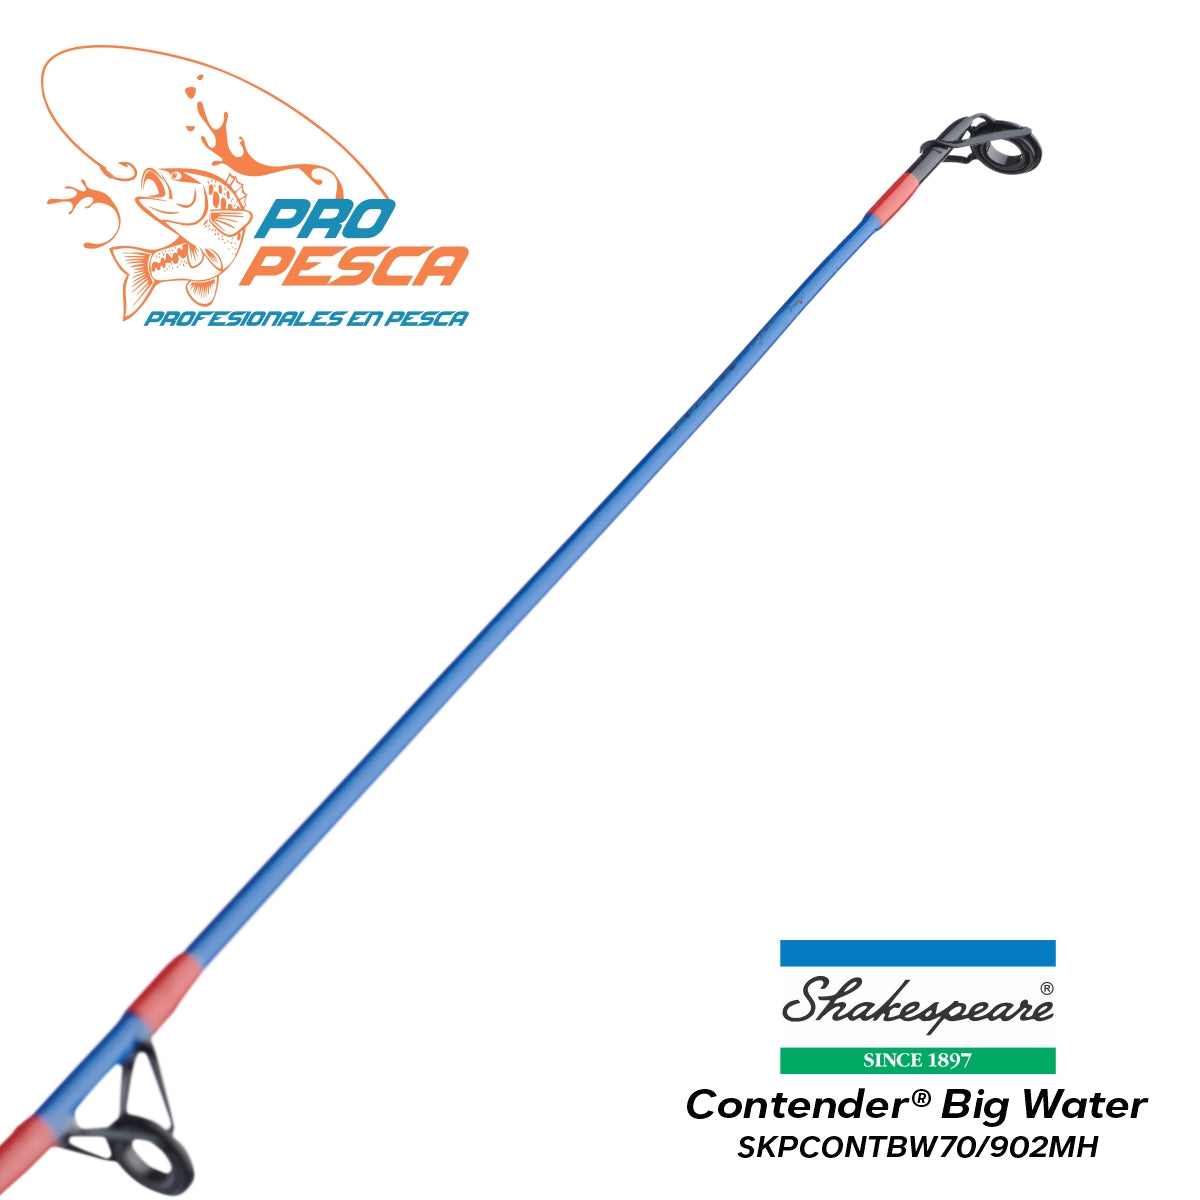 Shakespeare Contender® Big Water Spinning Combo 2.70mtrs – Pro Pesca